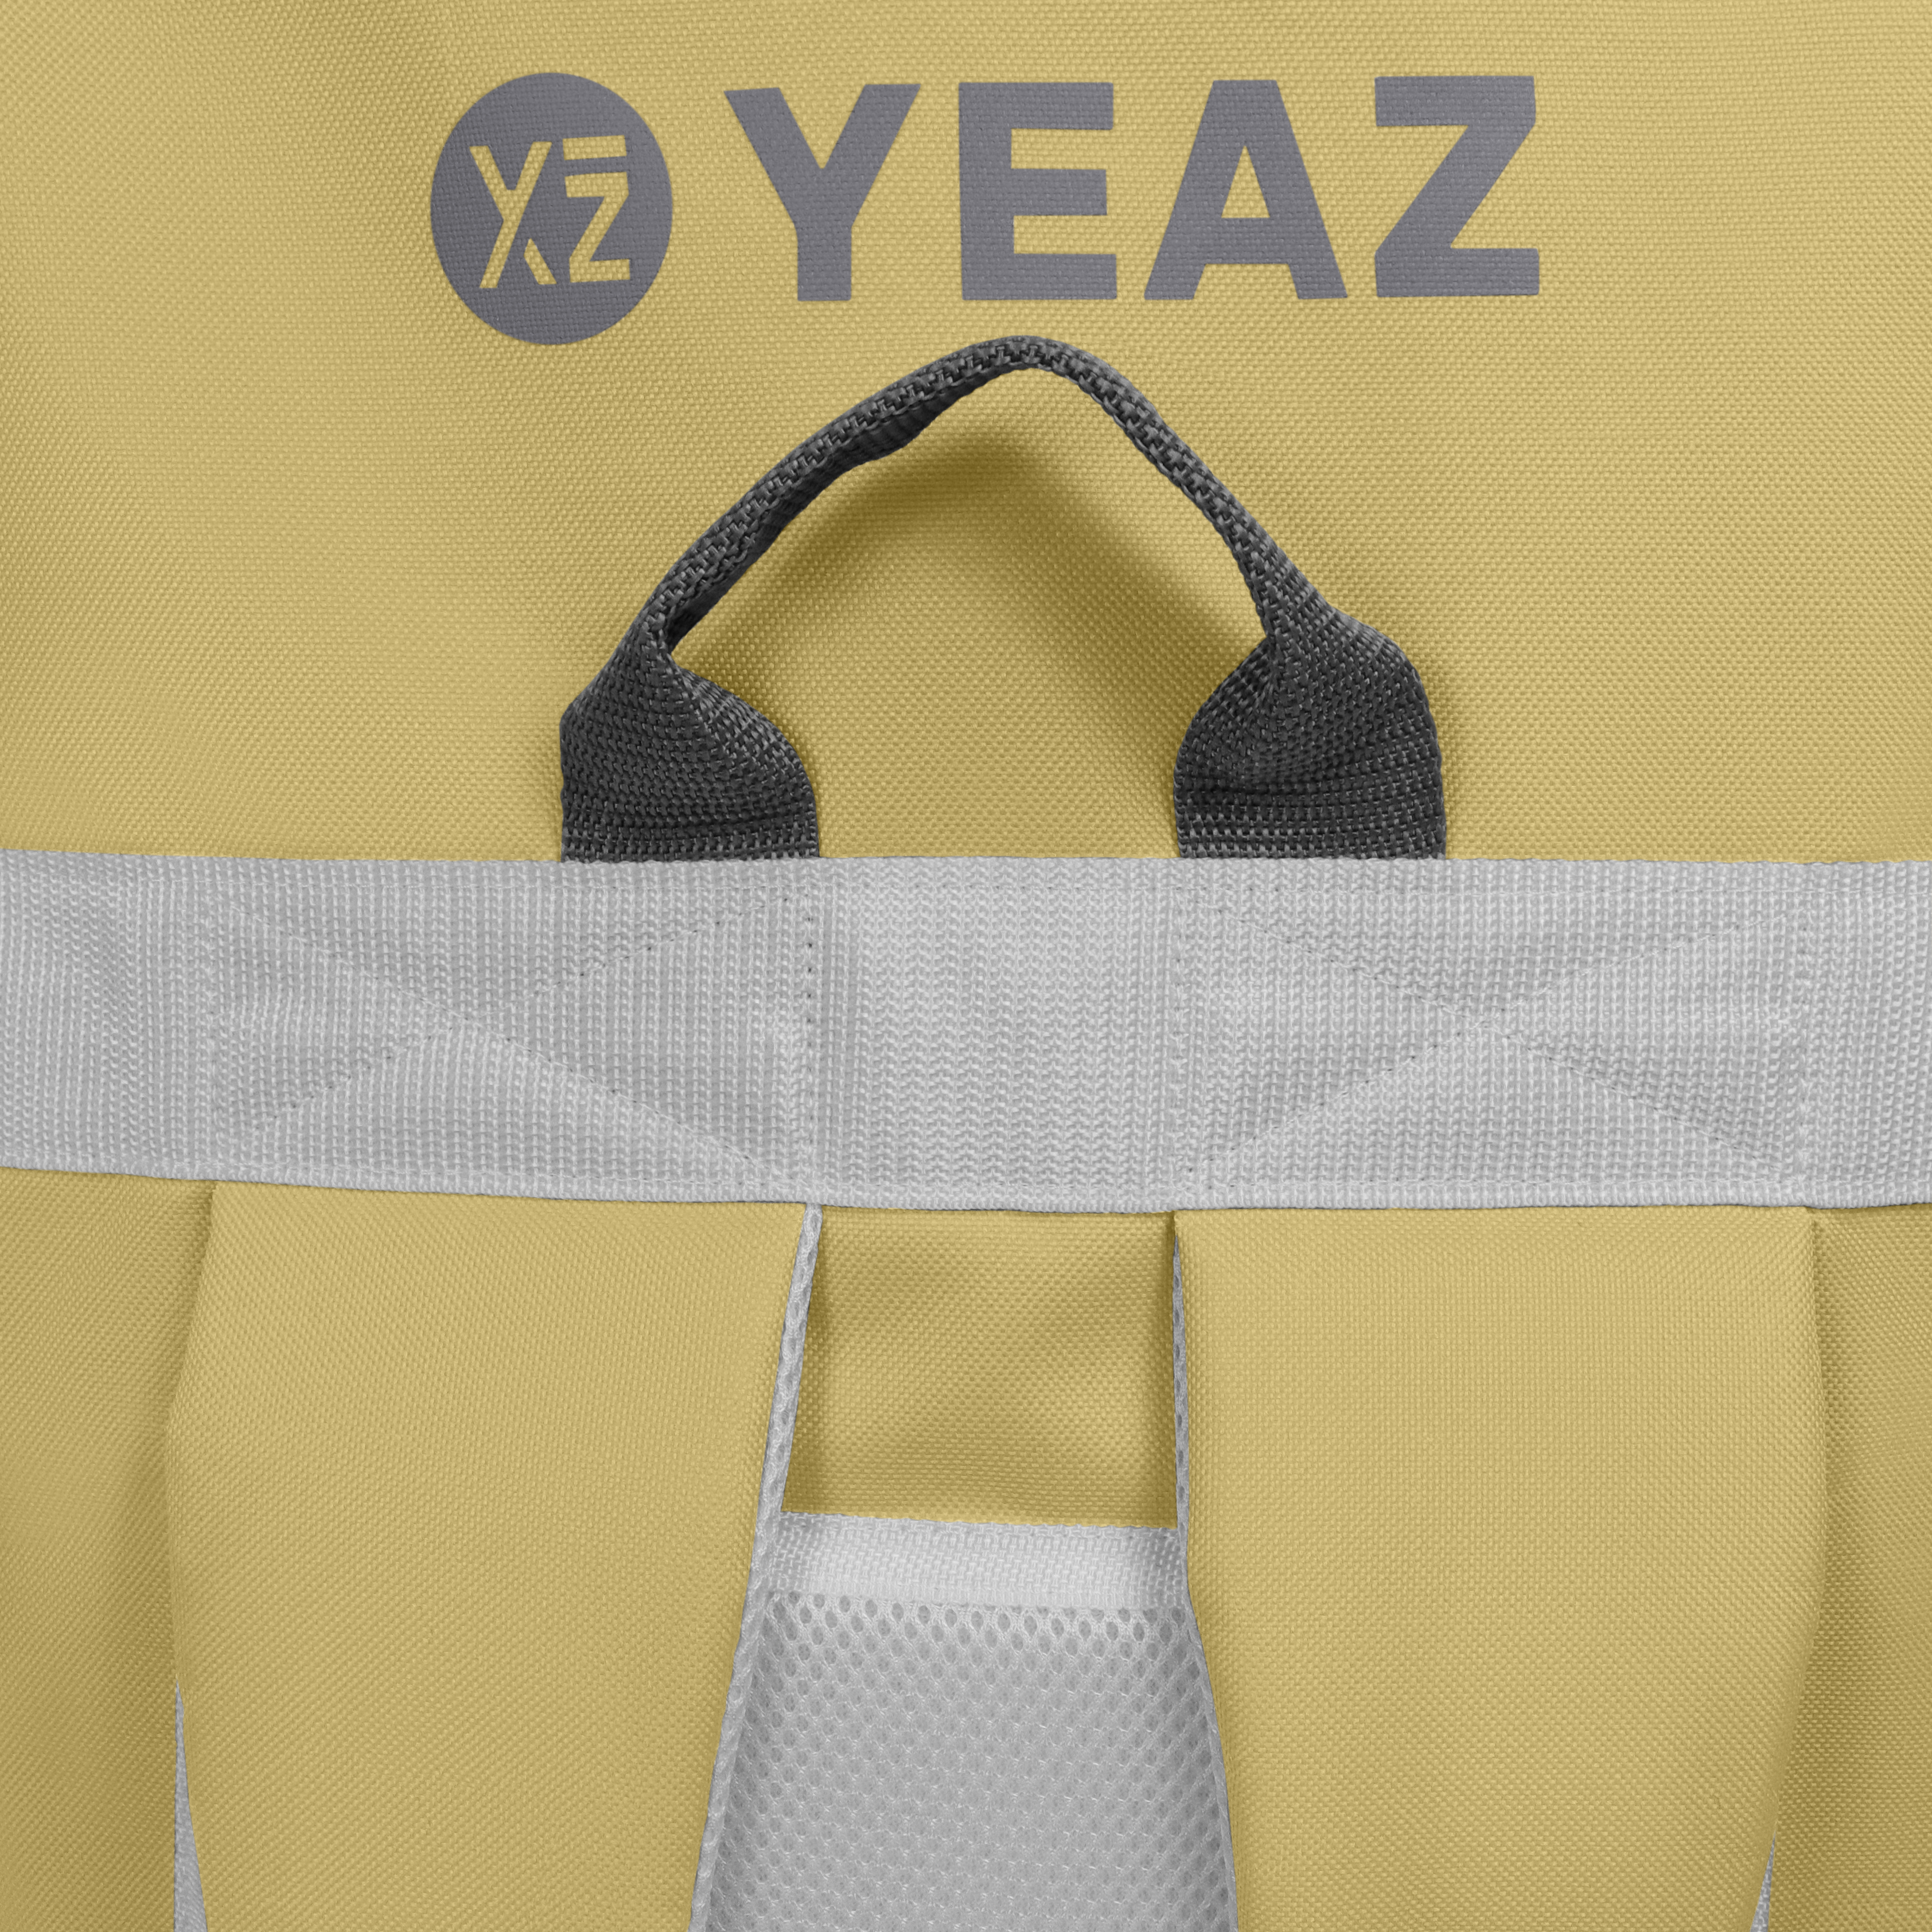 CLUB KIT LE YEAZ summer SUP Acessories,